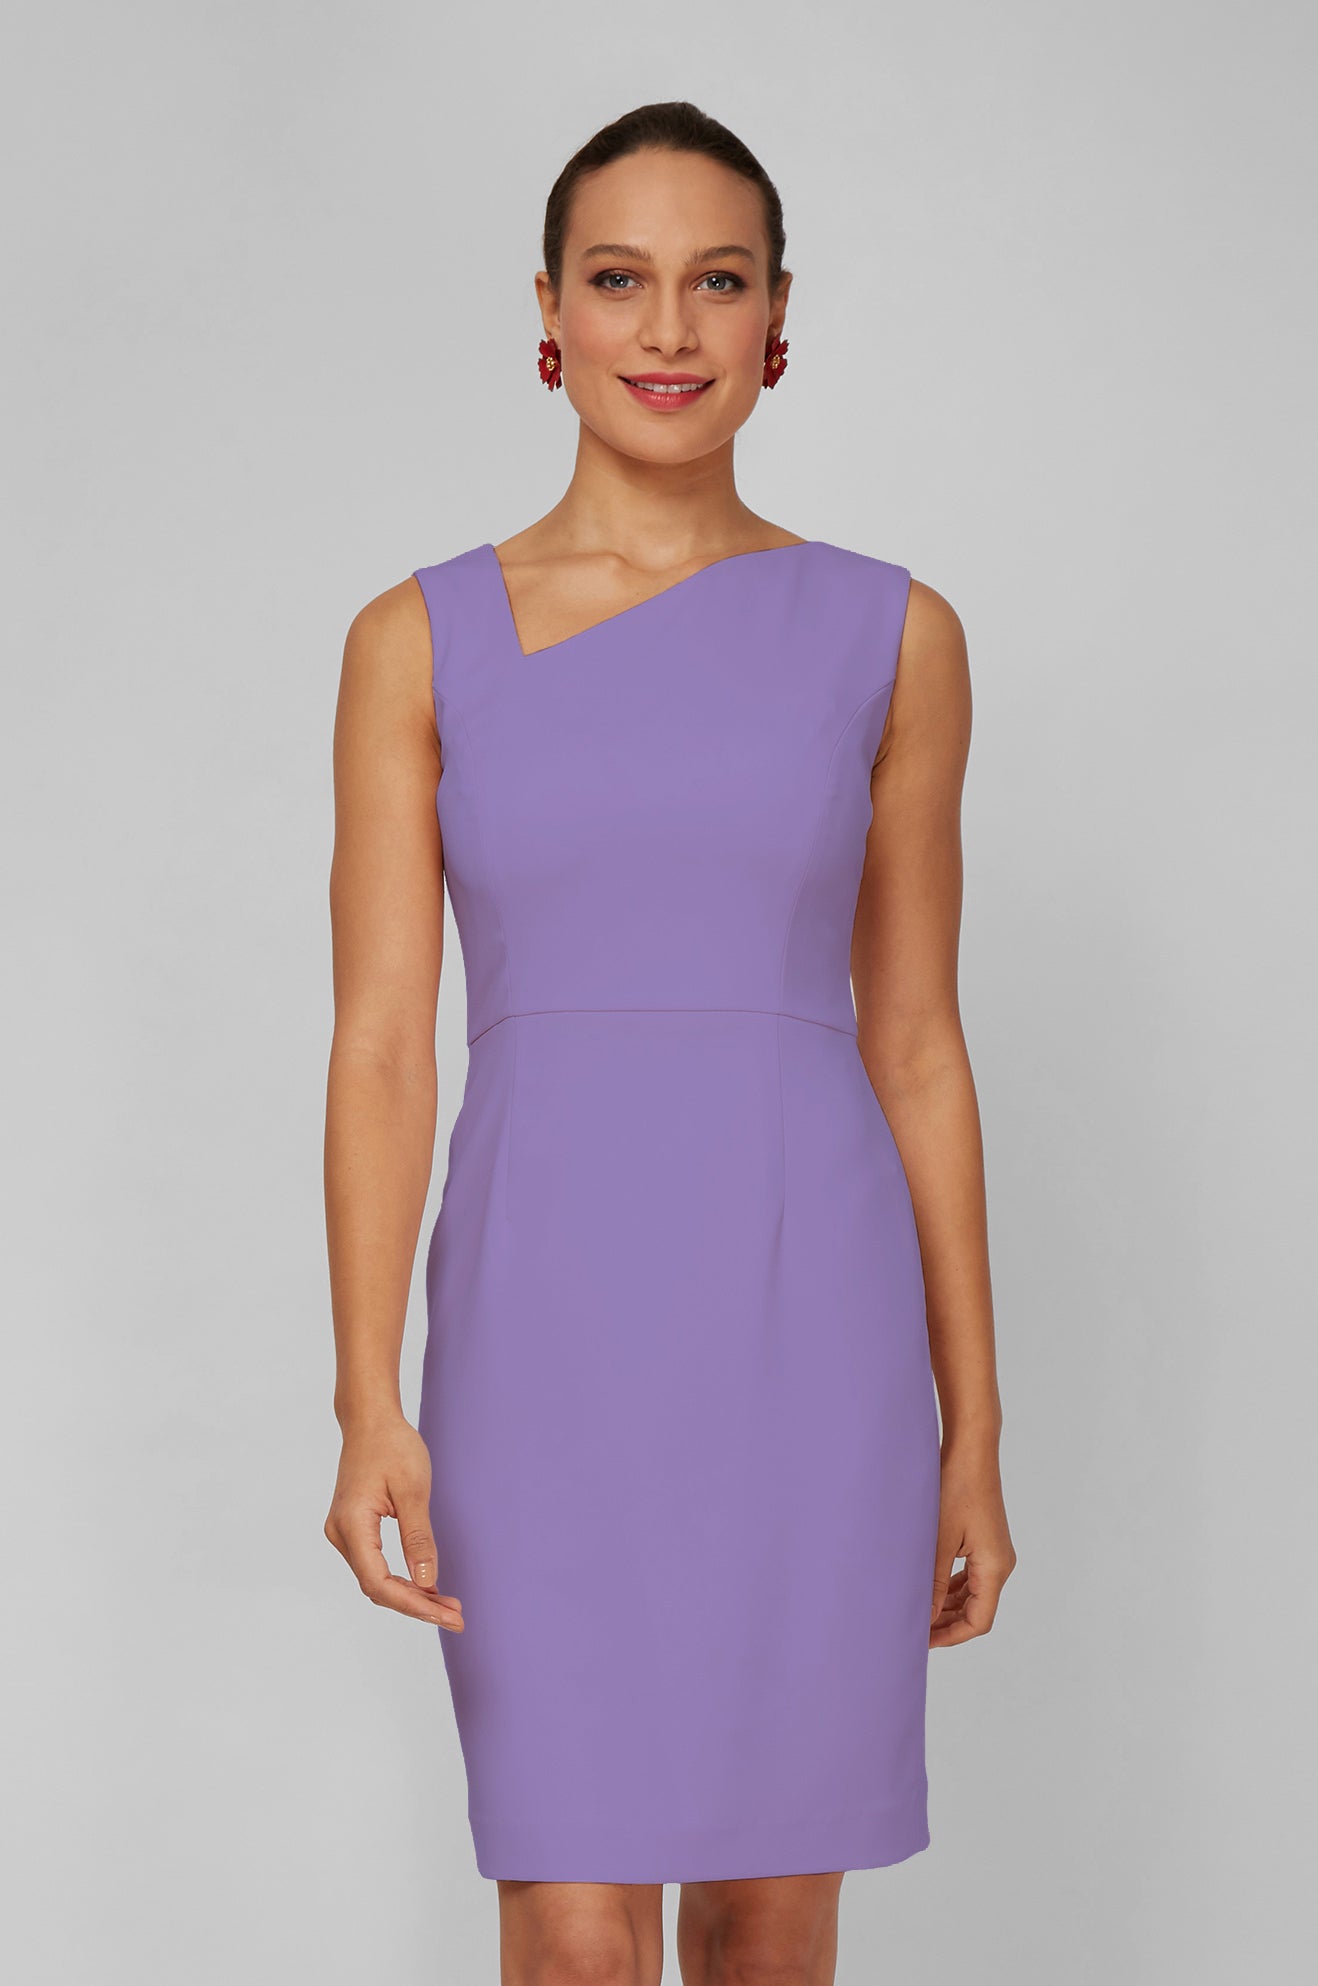 Women' Business Clea Dress - Thistle NORA GARDNER | OFFICIAL STORE for work and office